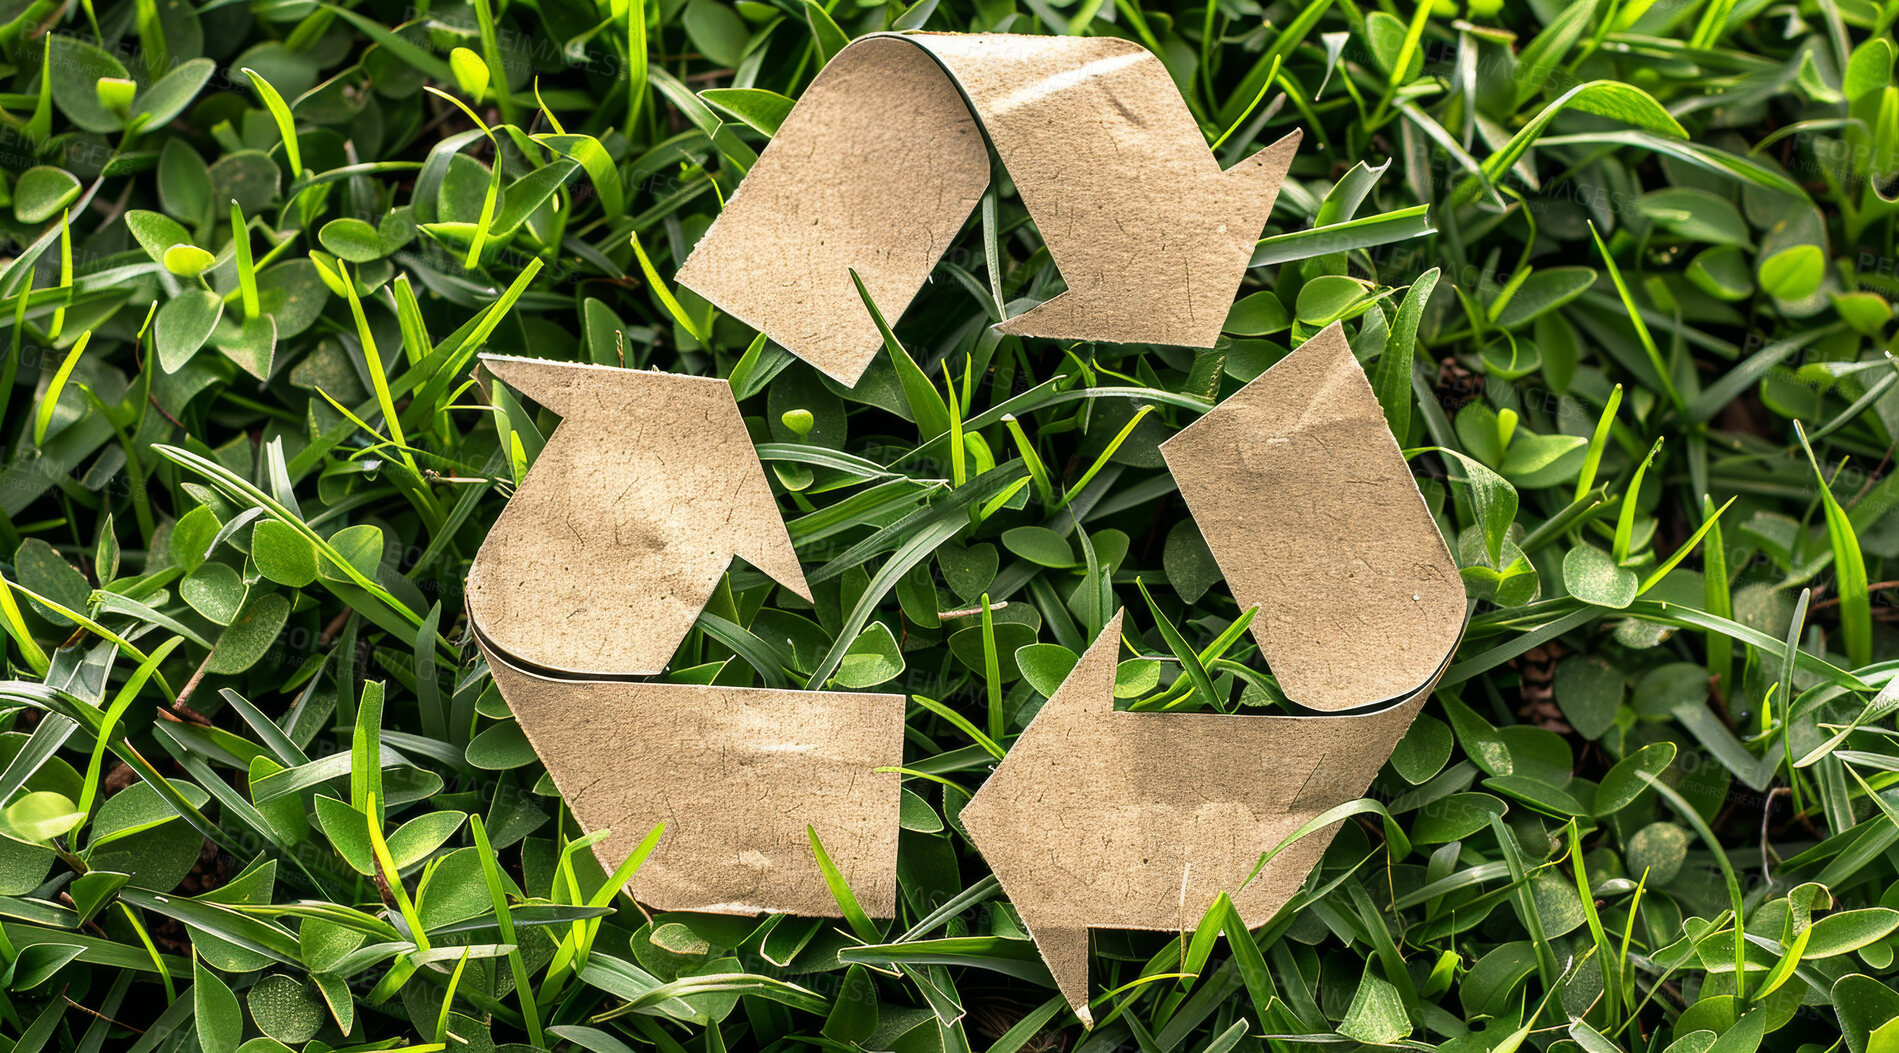 Buy stock photo Recycle, sign and cardboard on nature background for environmental, awareness and sustainability concept. Green grass, mockup and symbol with copyspace for Earth Day, eco system and ecology logo